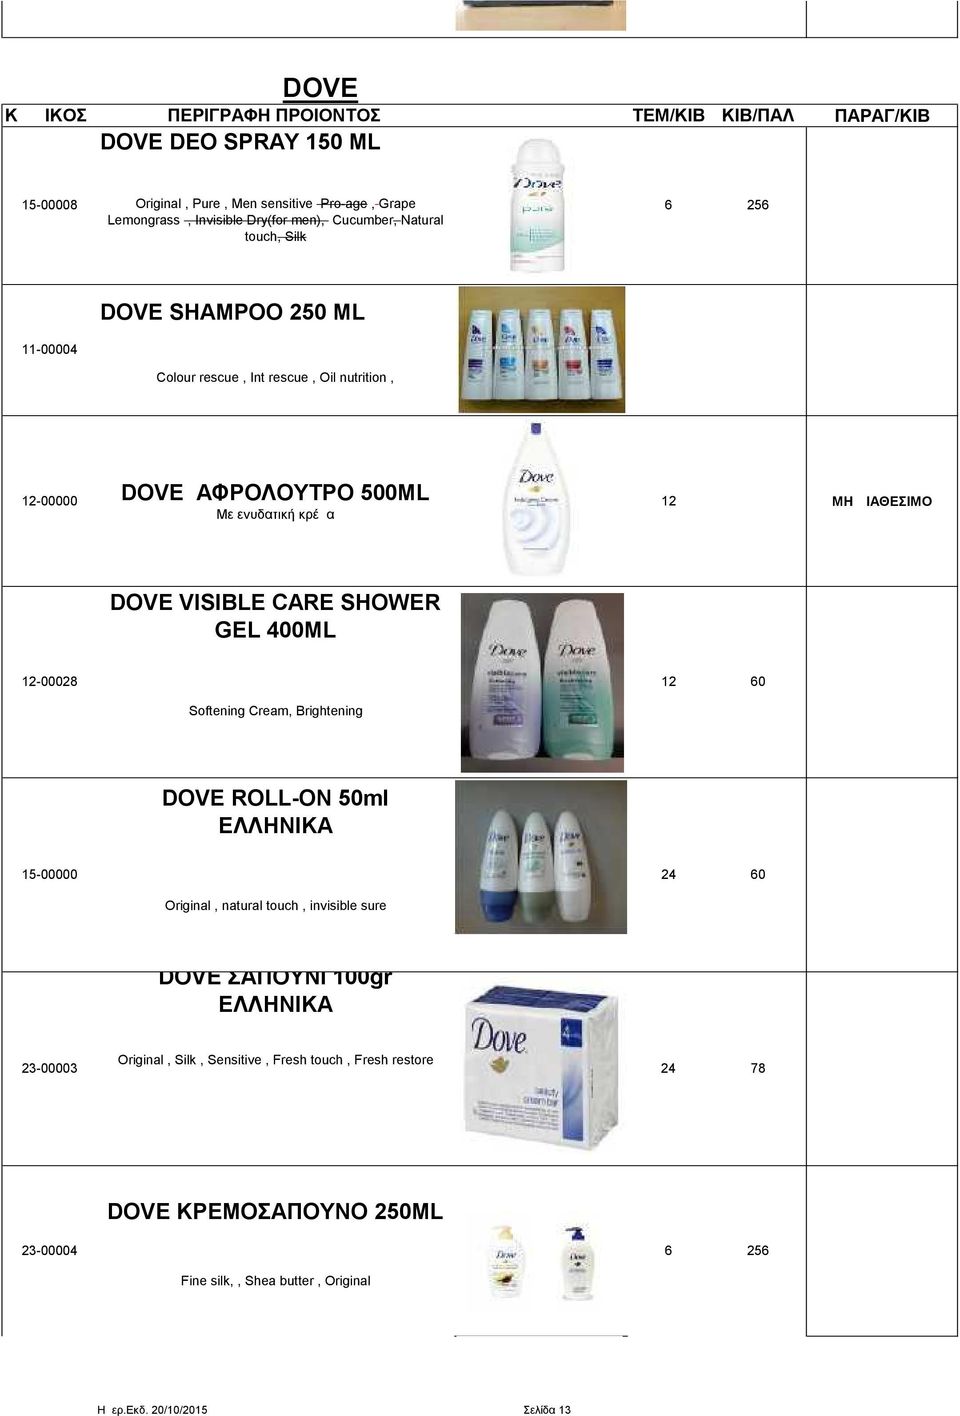 SHOWER GEL 400ML 12-00028 12 0 Softening Cream, Brightening DOVE ROLL-ON 50ml 15-00000 24 0 Original, natural touch, invisible sure DOVE ΣΑΠΟΥΝΙ 100gr